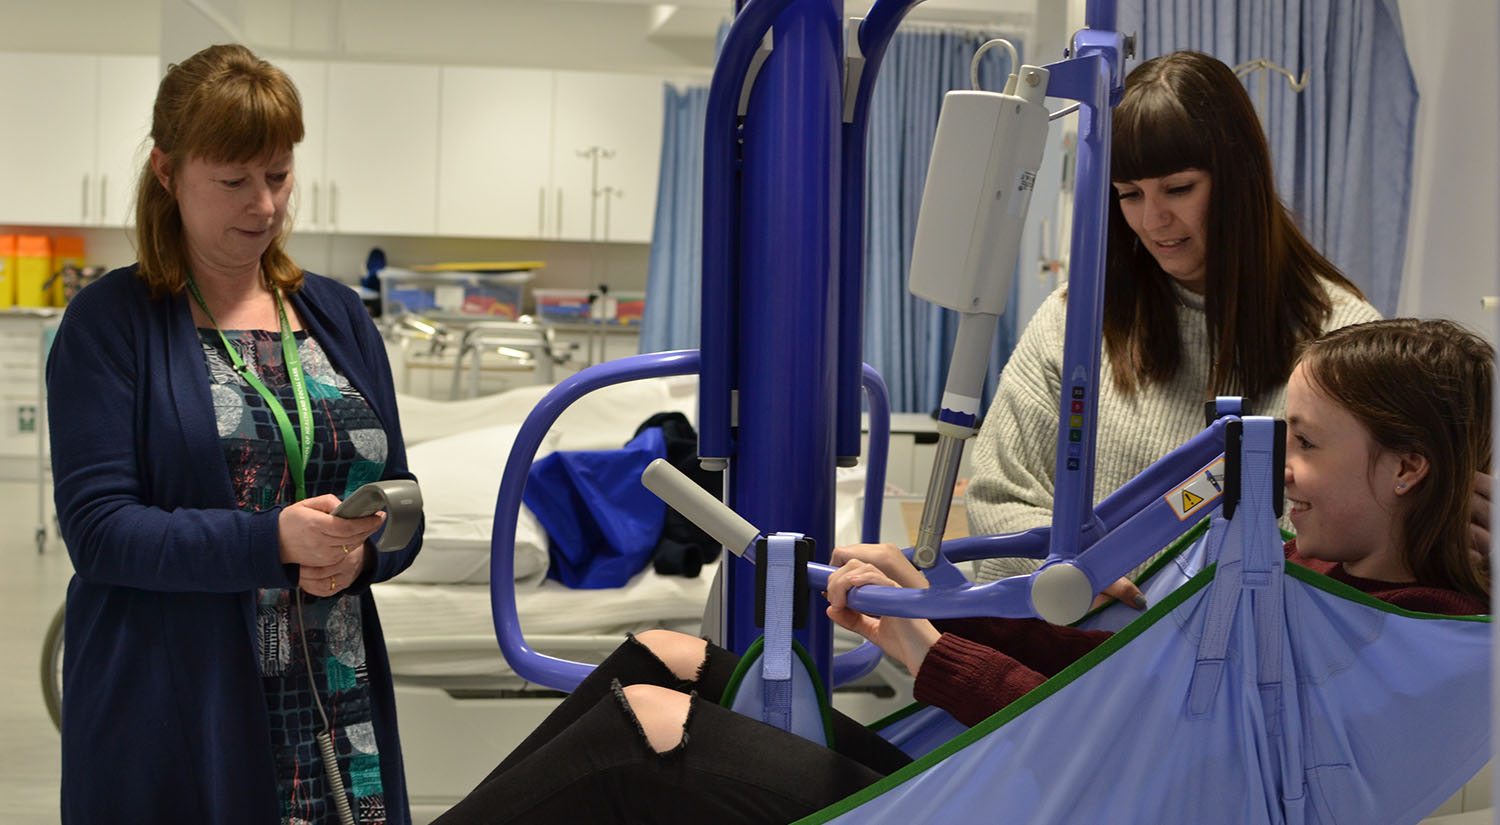 Occupational Therapy students practising using a hoist